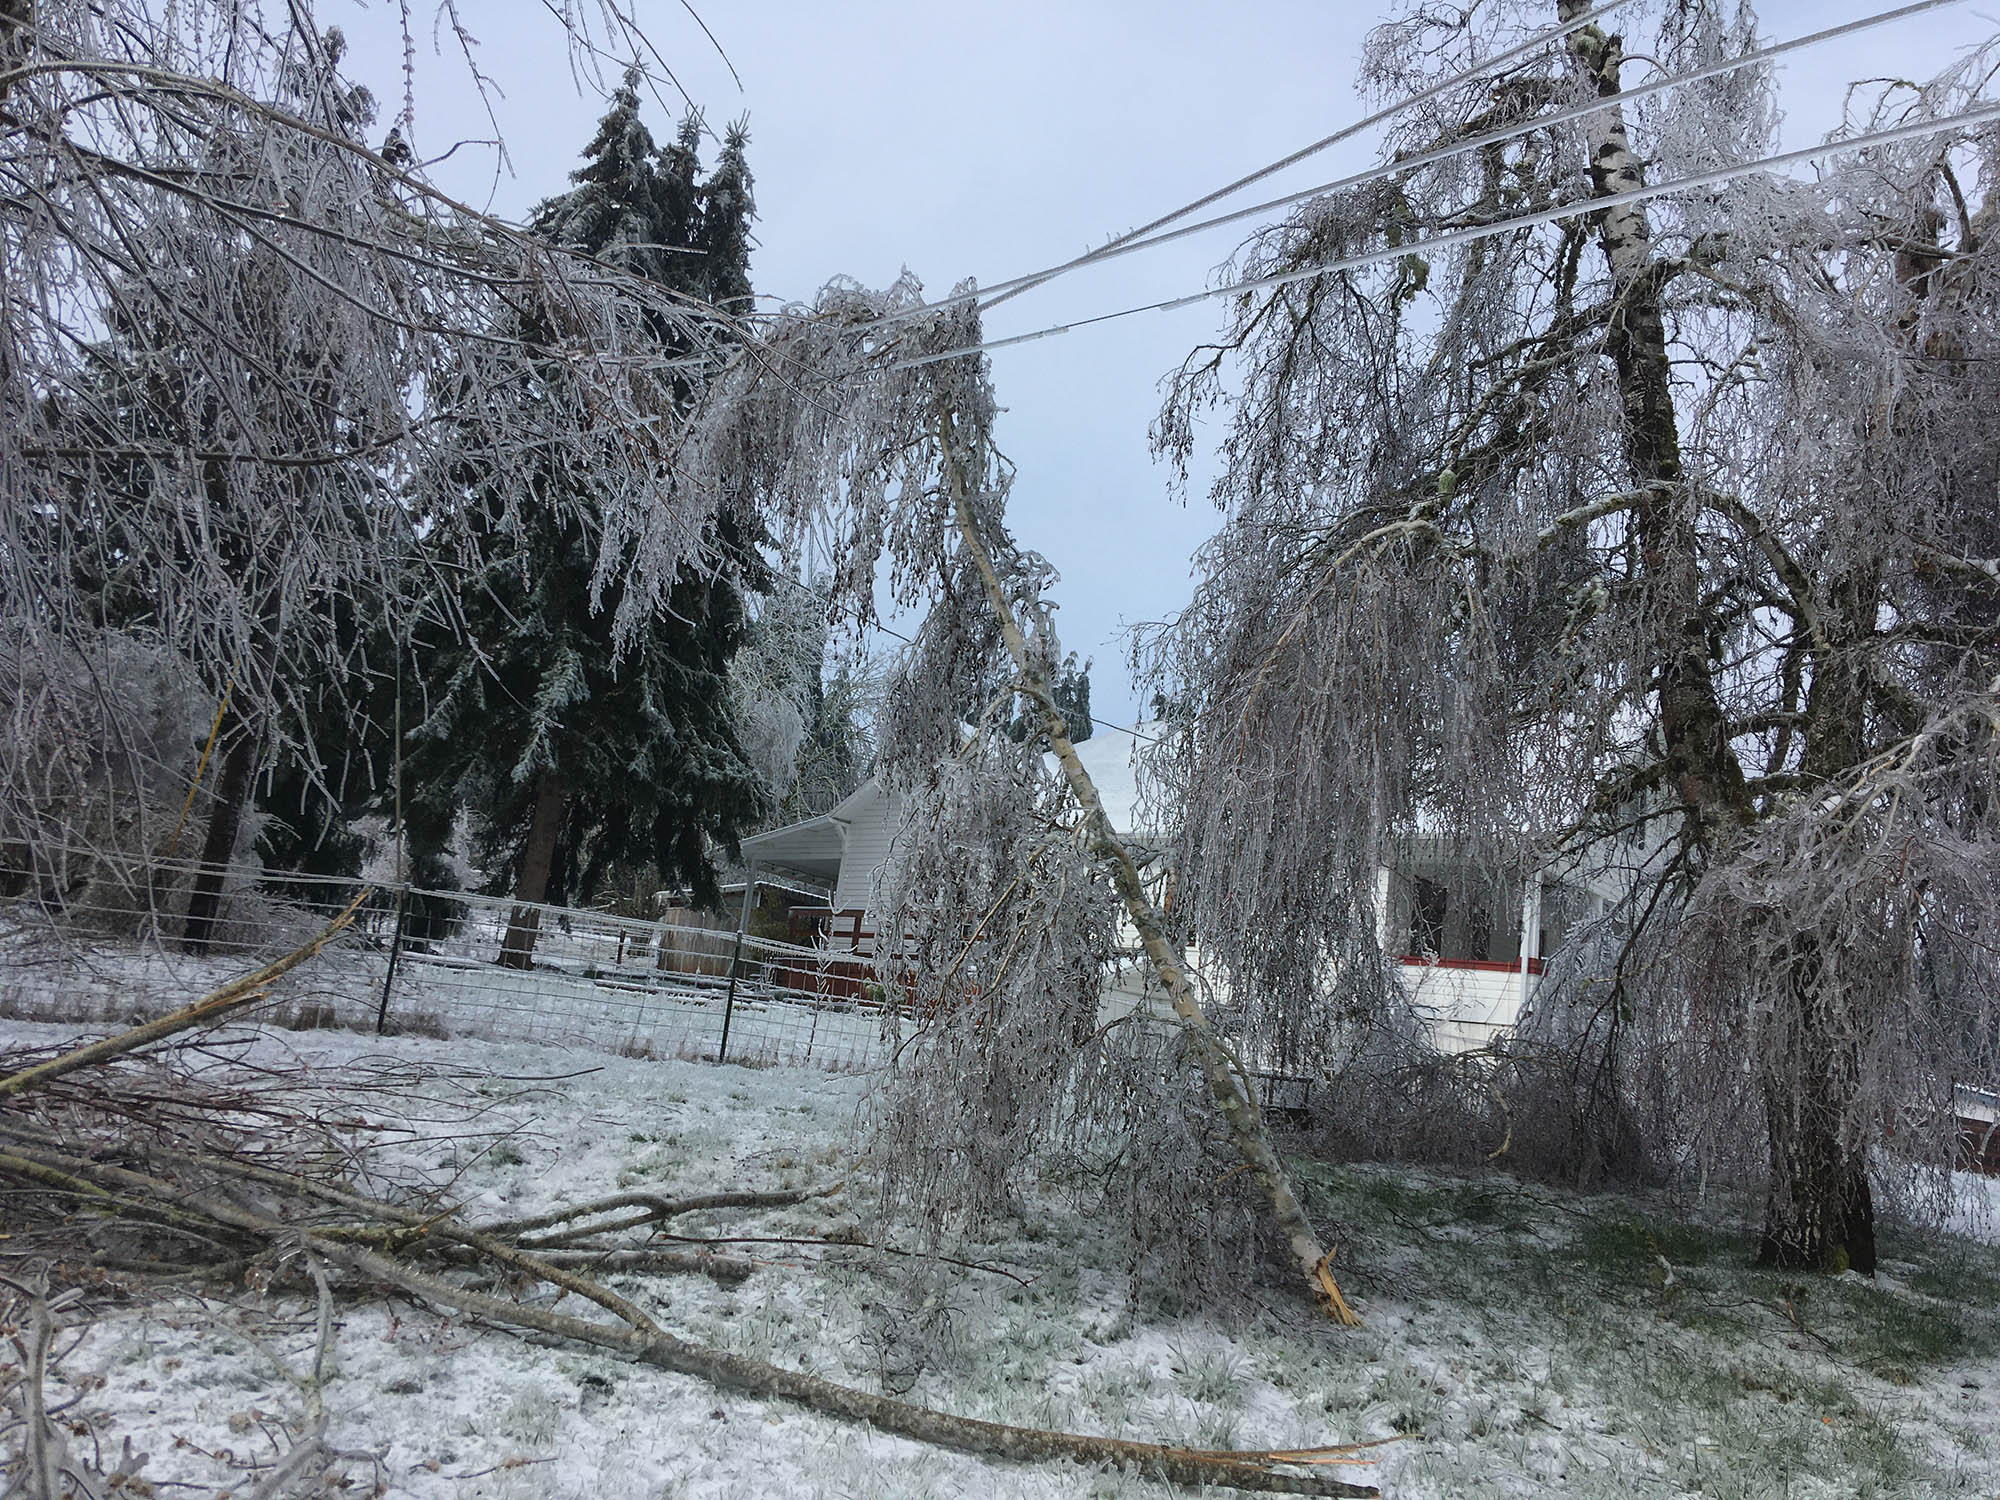 A branch, covered in ice, hangs on a power line